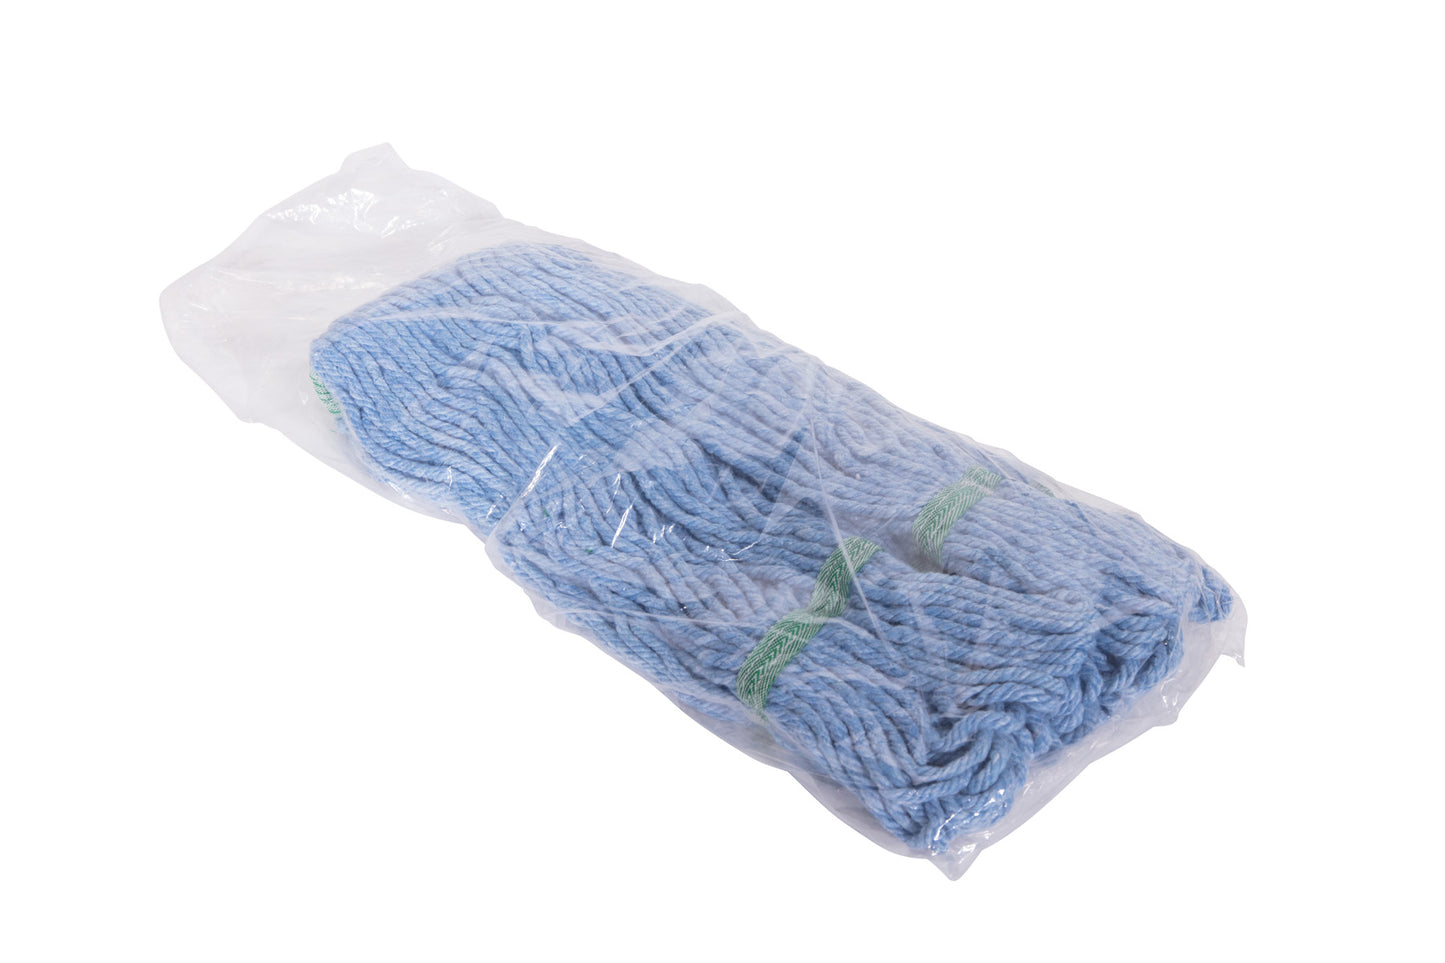 Mop head, #20 cotton looped-end